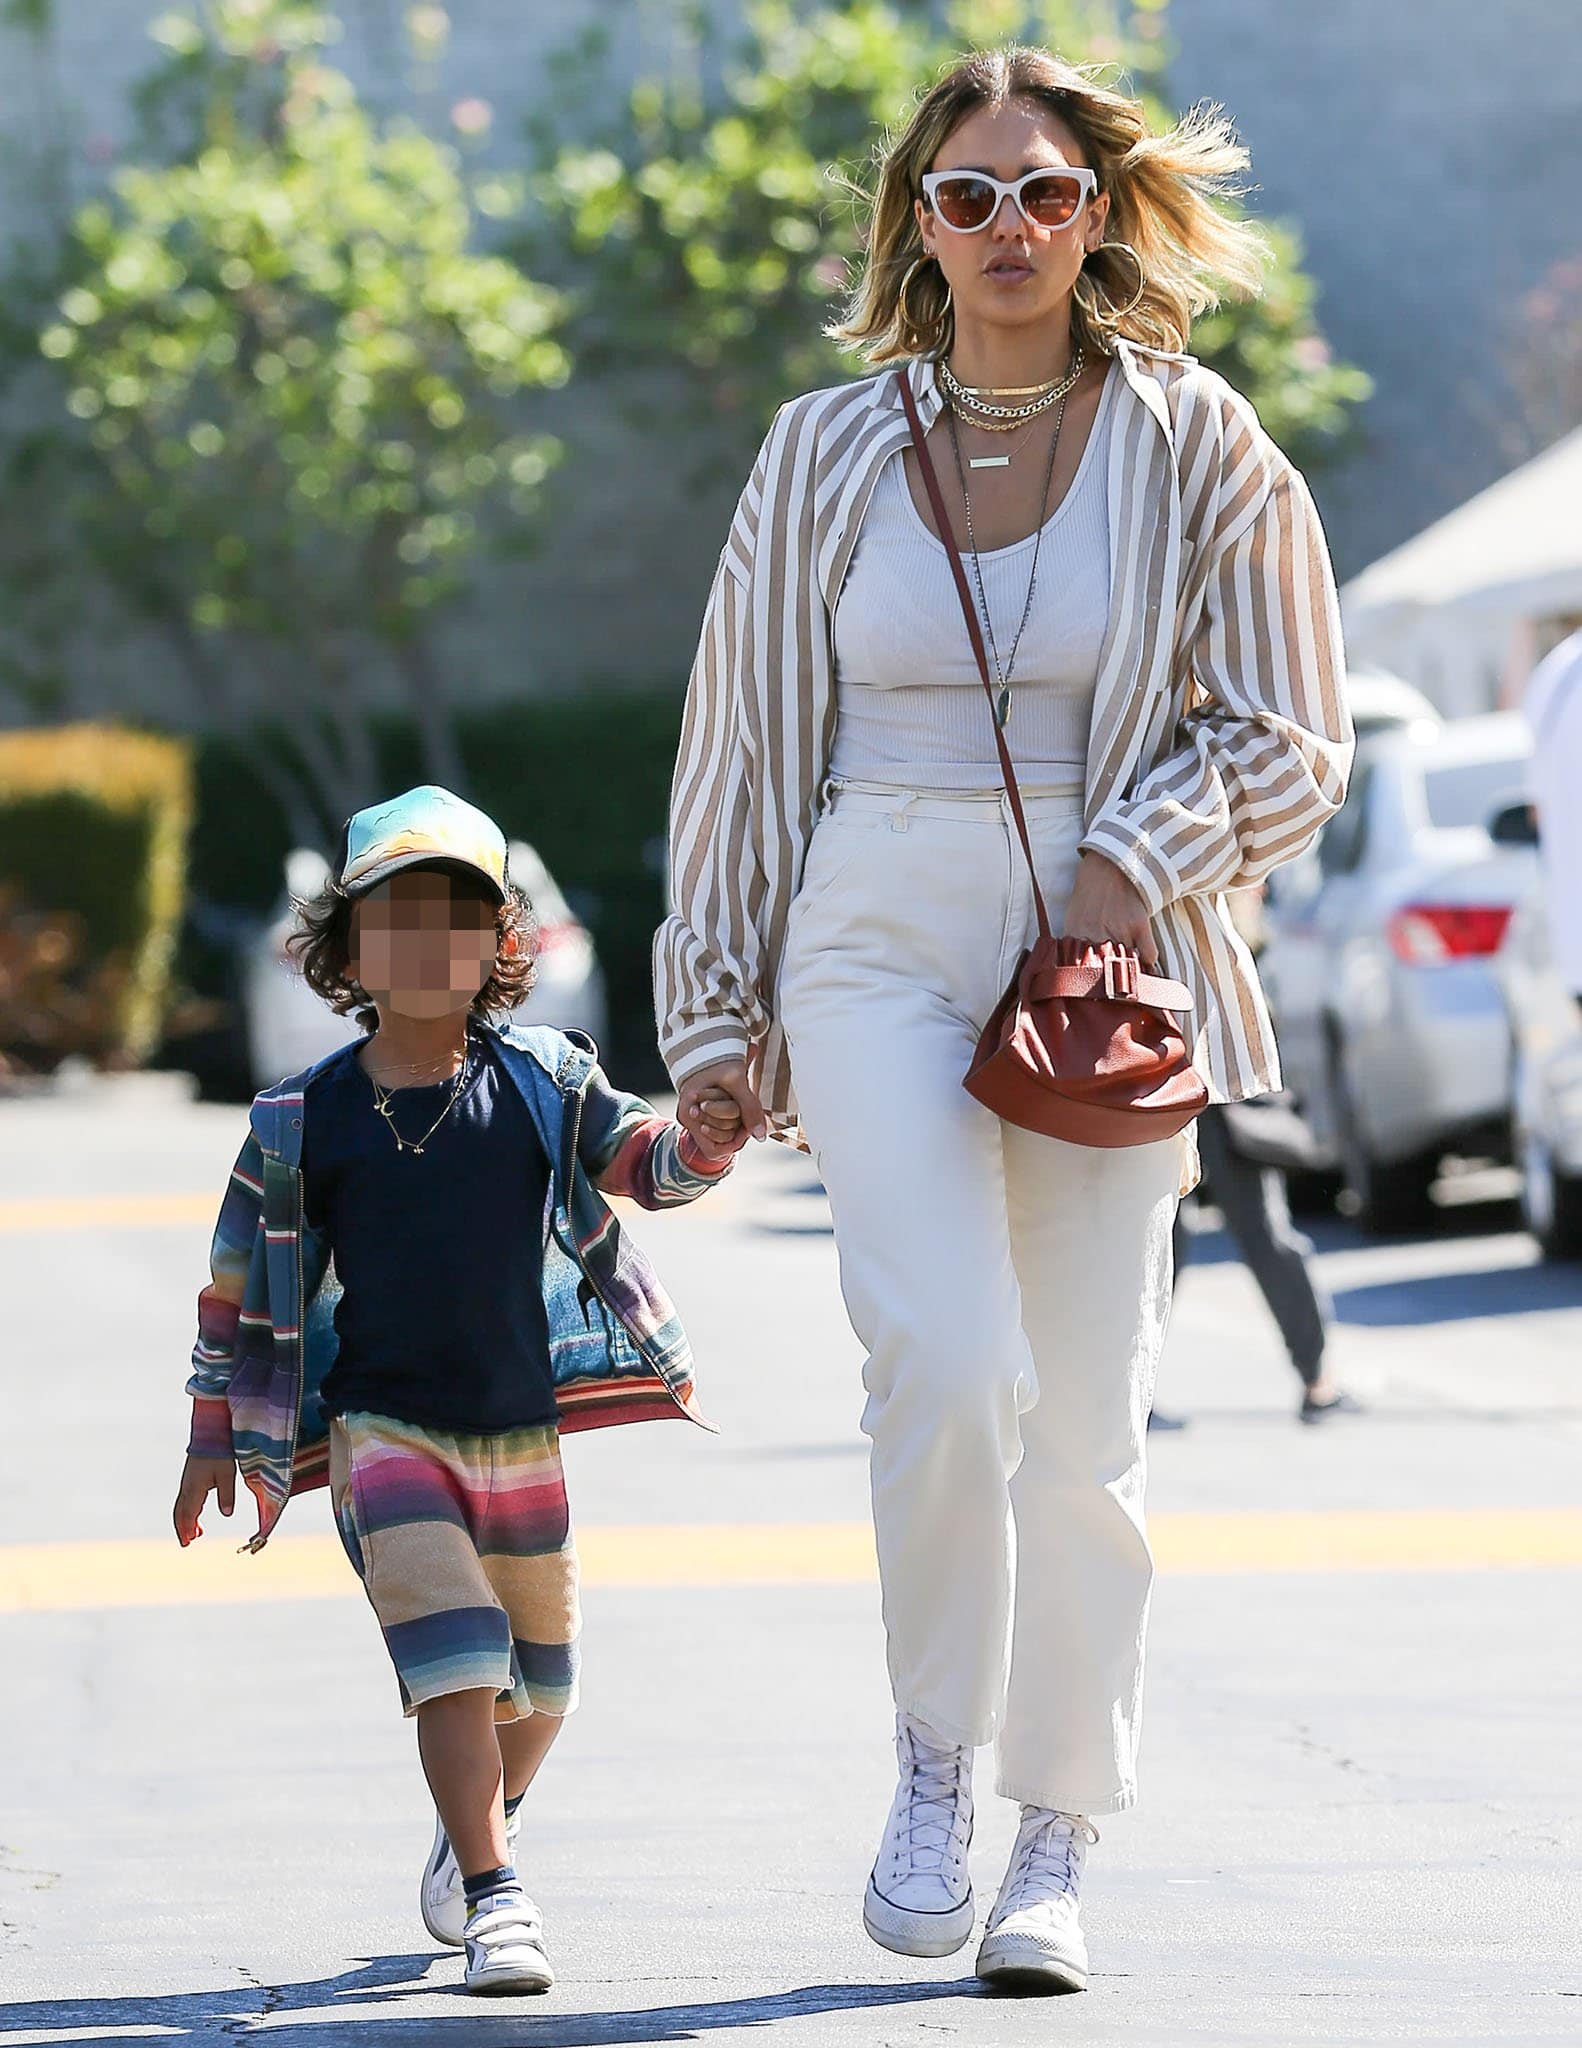 Jessica Alba wears a Kittenish striped shirt with a semi-sheer tank top and cream-colored pants